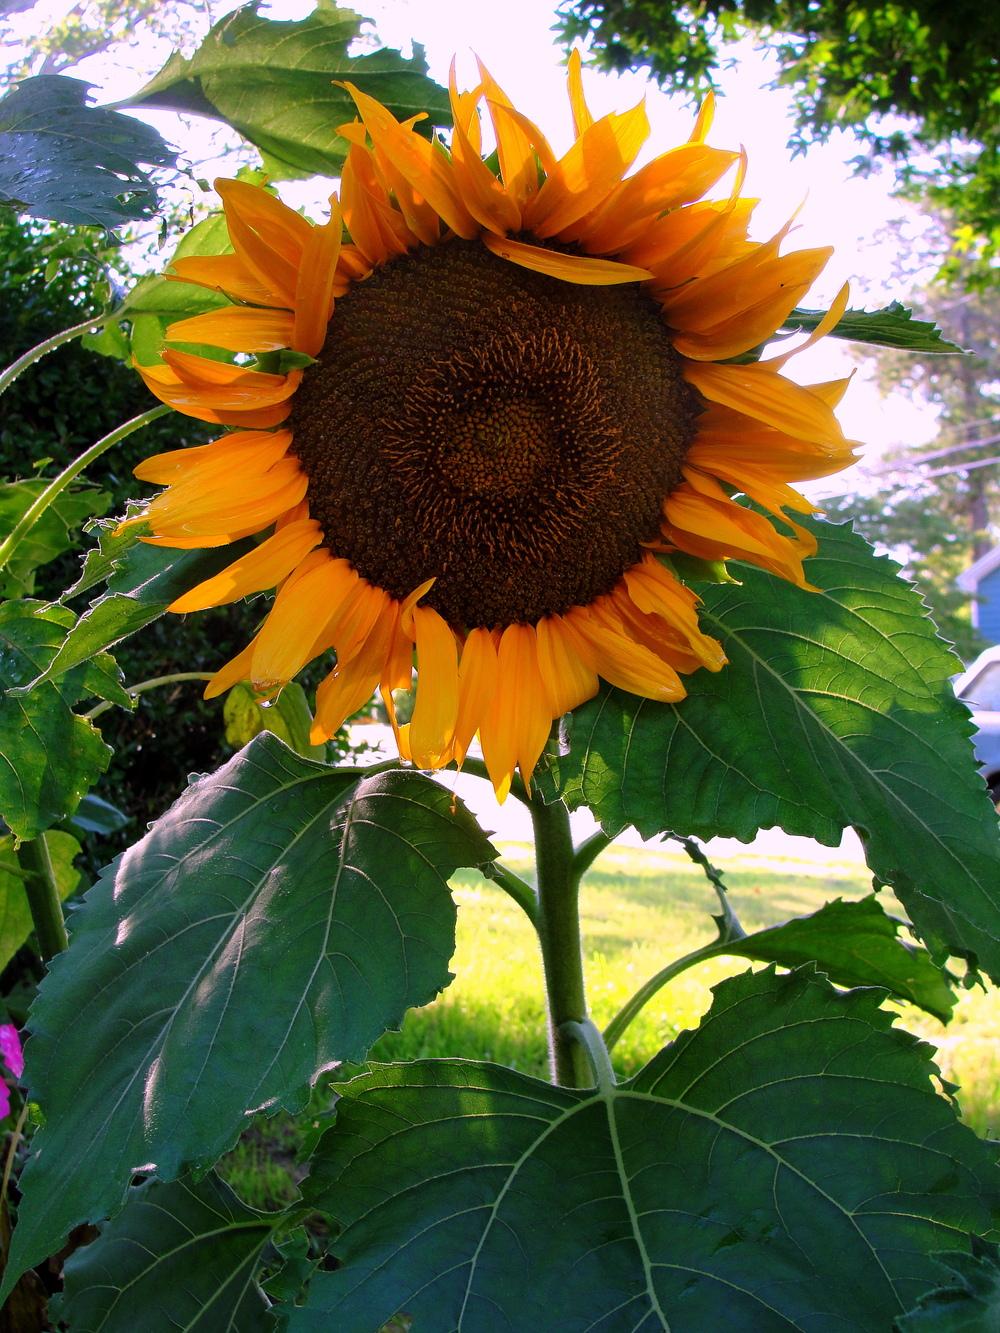 Photo of Sunflowers (Helianthus annuus) uploaded by keithp2012